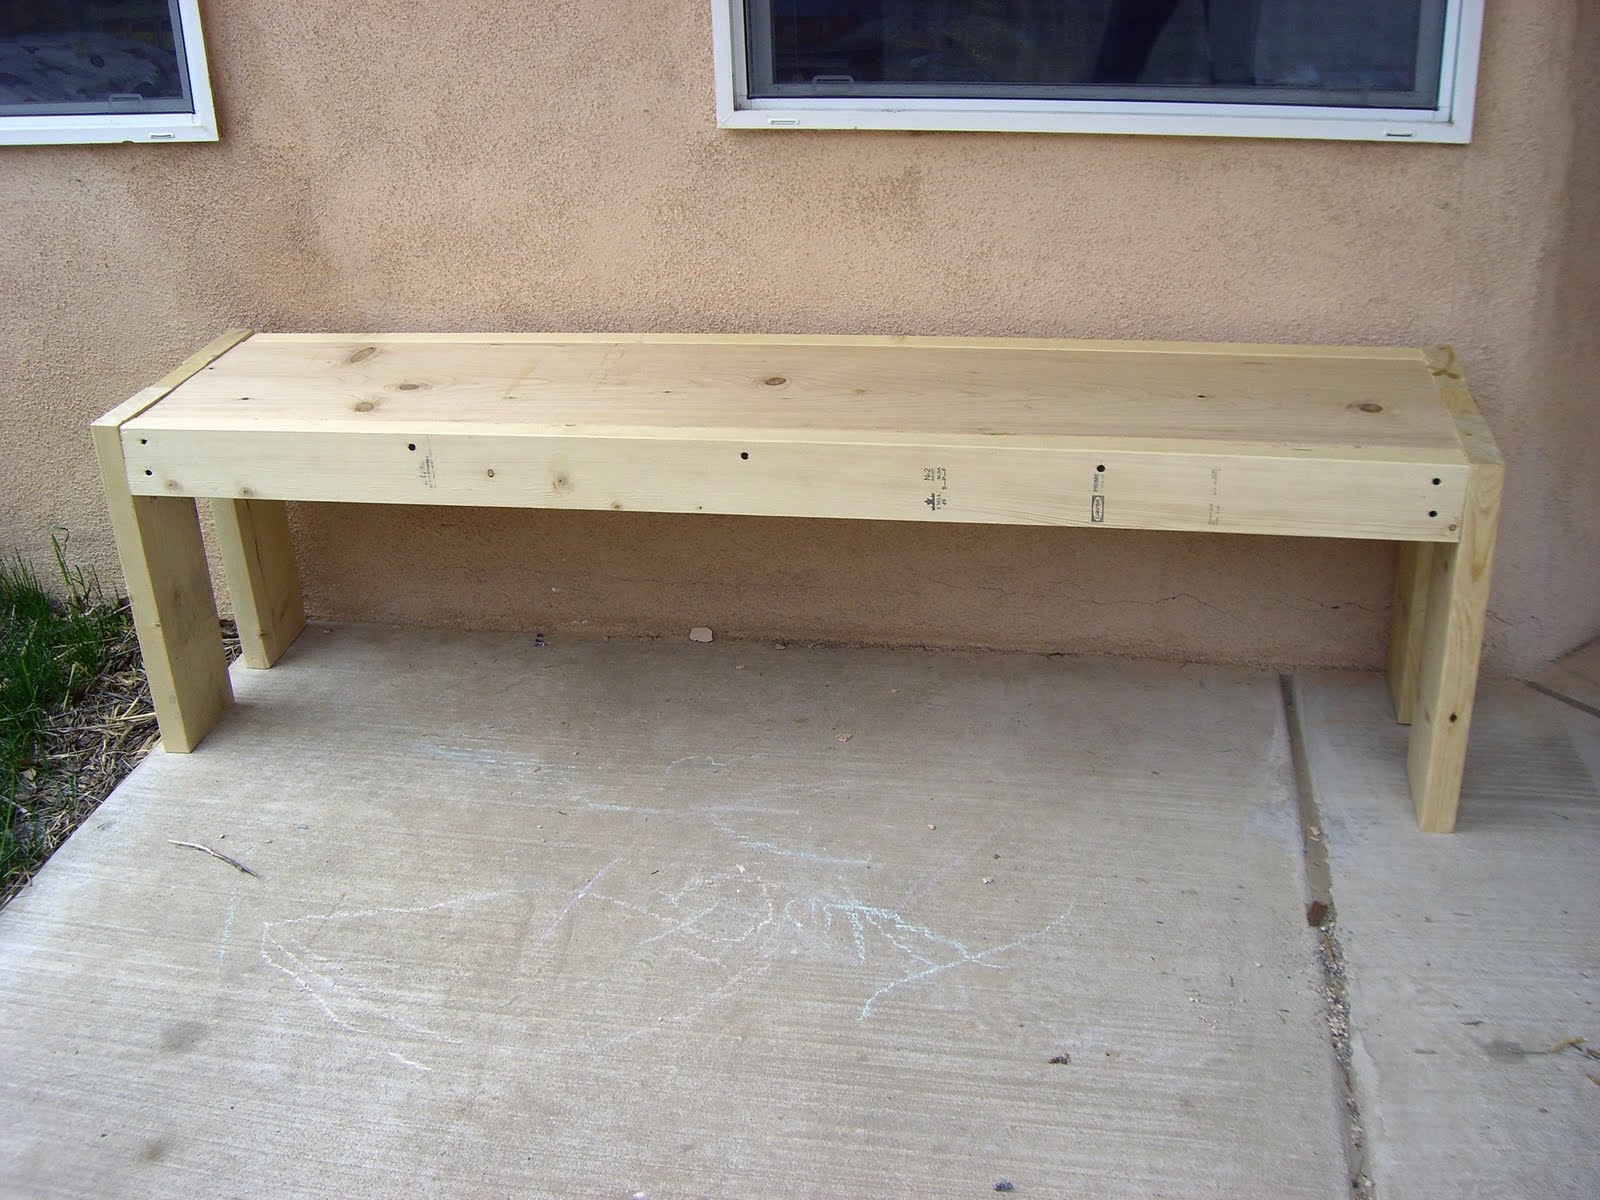 Outdoor Wood Bench Plans - Step By Step DIY Woodworking Blueprints PDF 